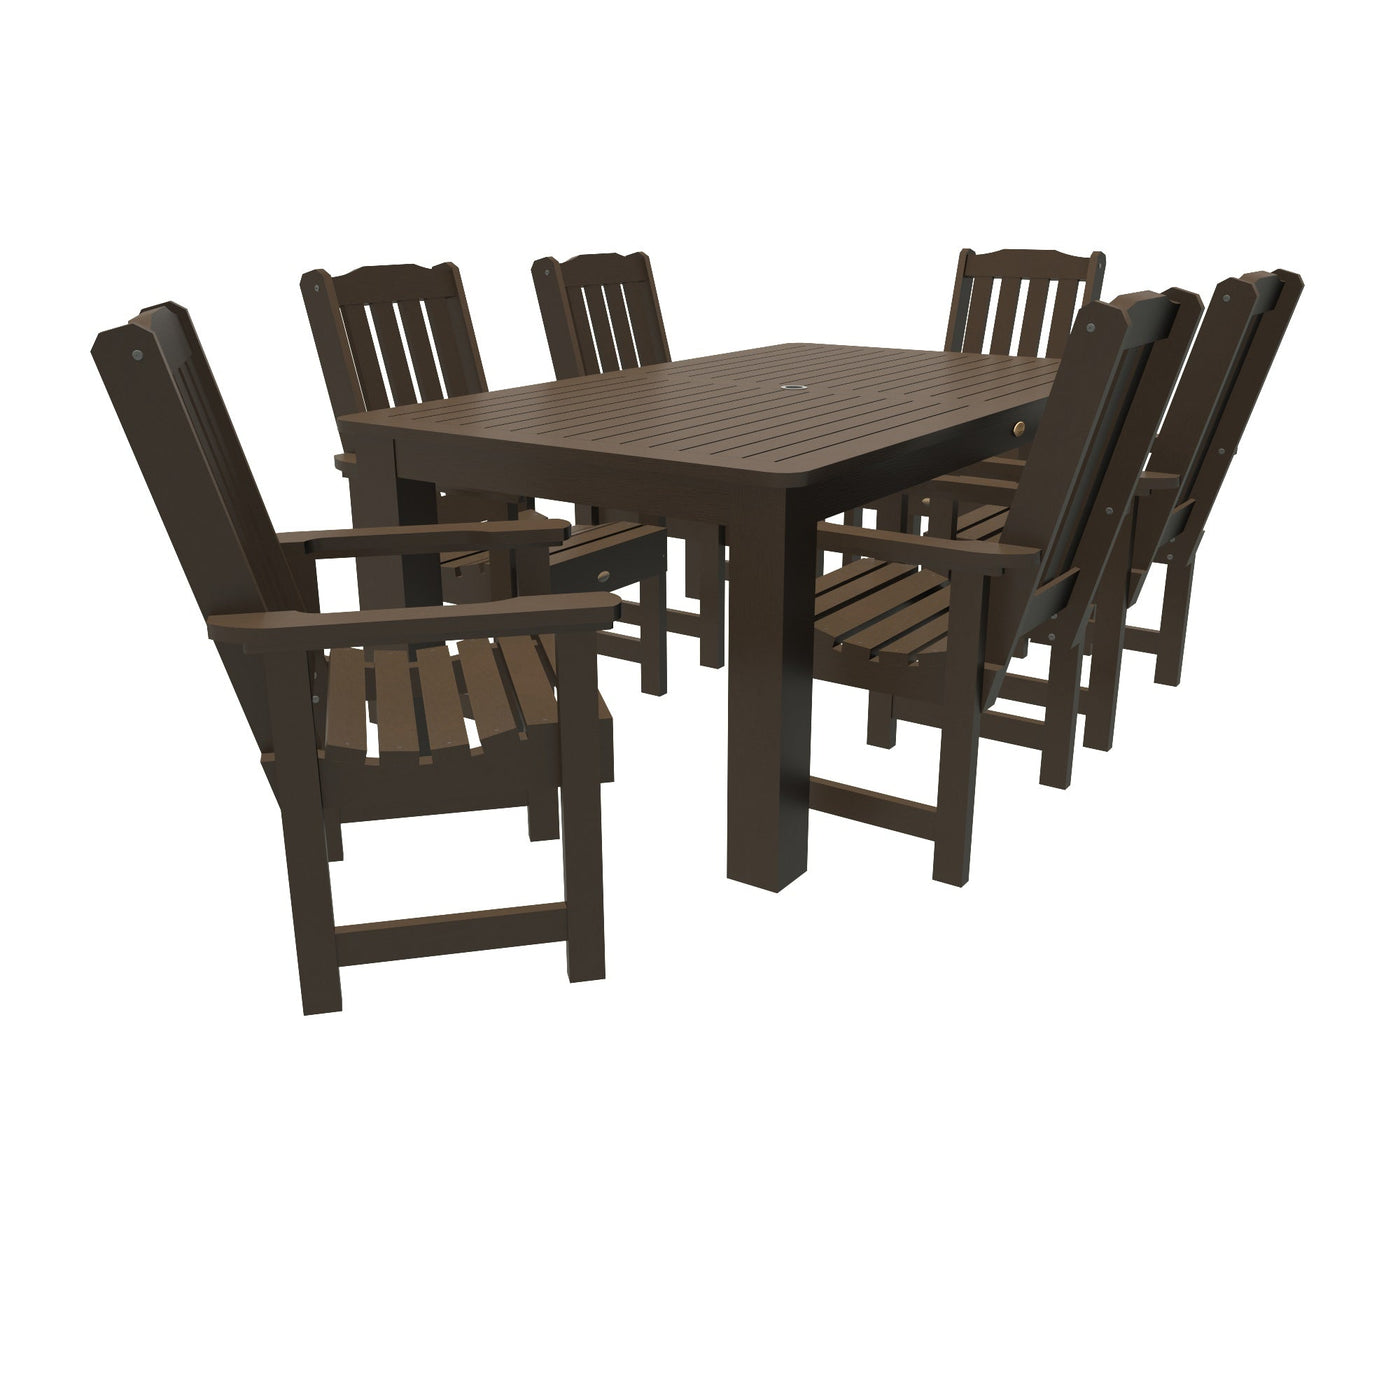 Lehigh 7pc Rectangular Outdoor Dining Set 42in x 72in - Dining Height Dining Highwood USA Weathered Acorn 